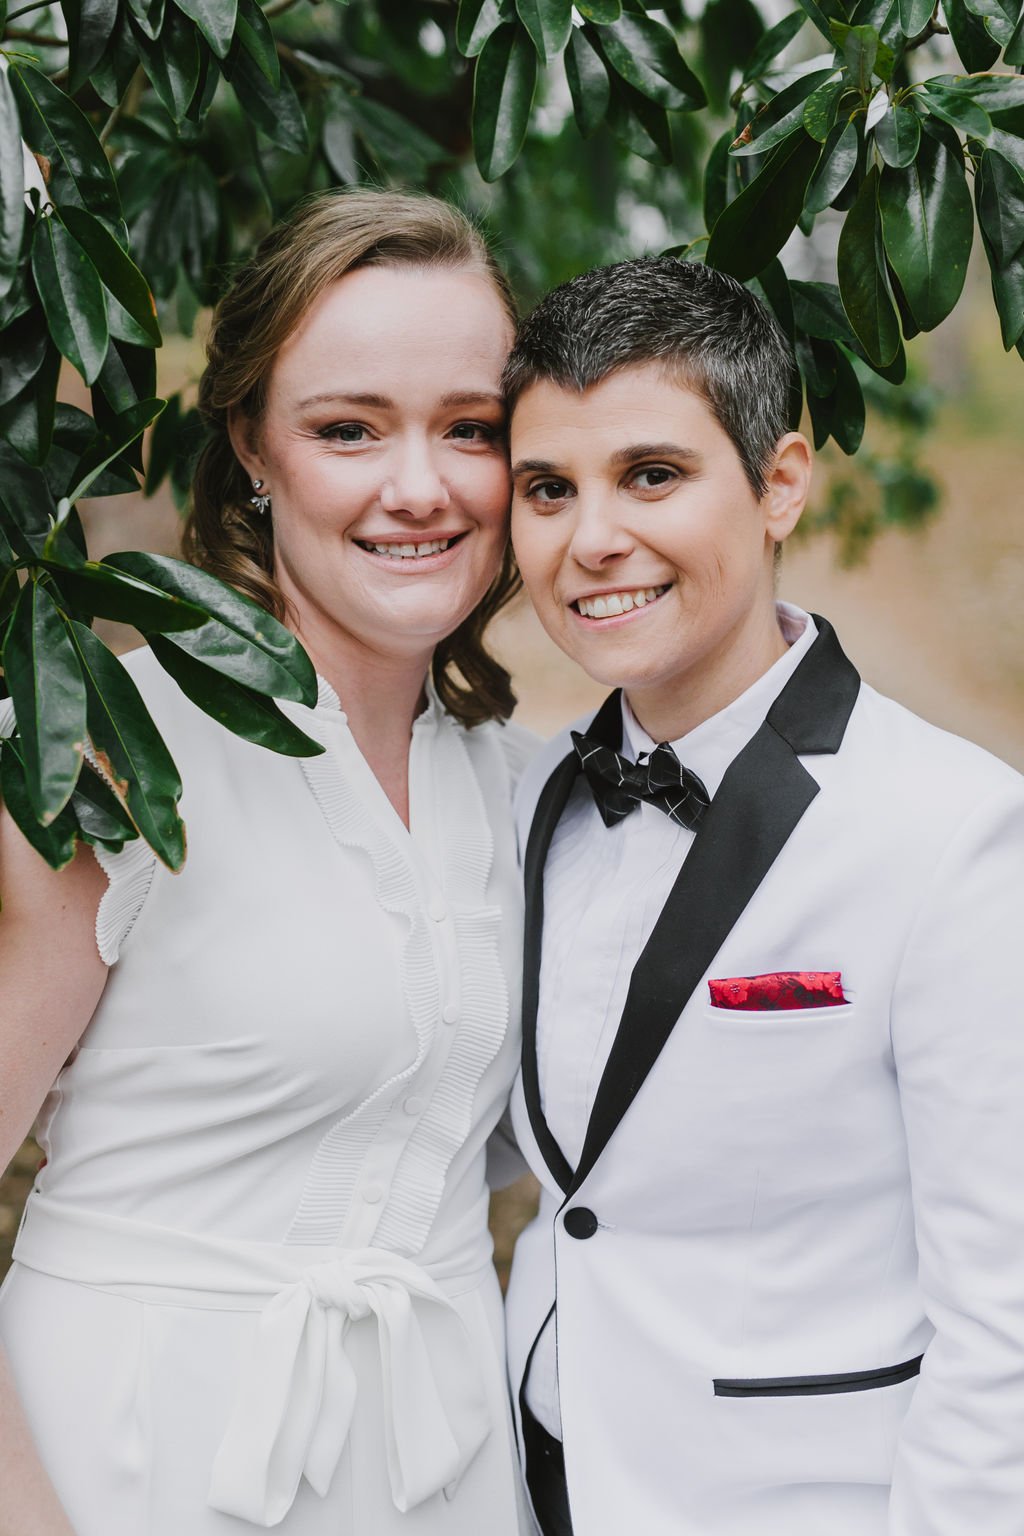 Tobey+Lindsey'sWedding-EmilyTebbettsPhotography-13 Intimate Queer Lesbian LGBTQ Winter Boston Arboretum Jamaica Plain Roslindale Wedding at the Milky Way Lounge and Restaurant in Massachusetts new england by queer elopement photographer .jpg